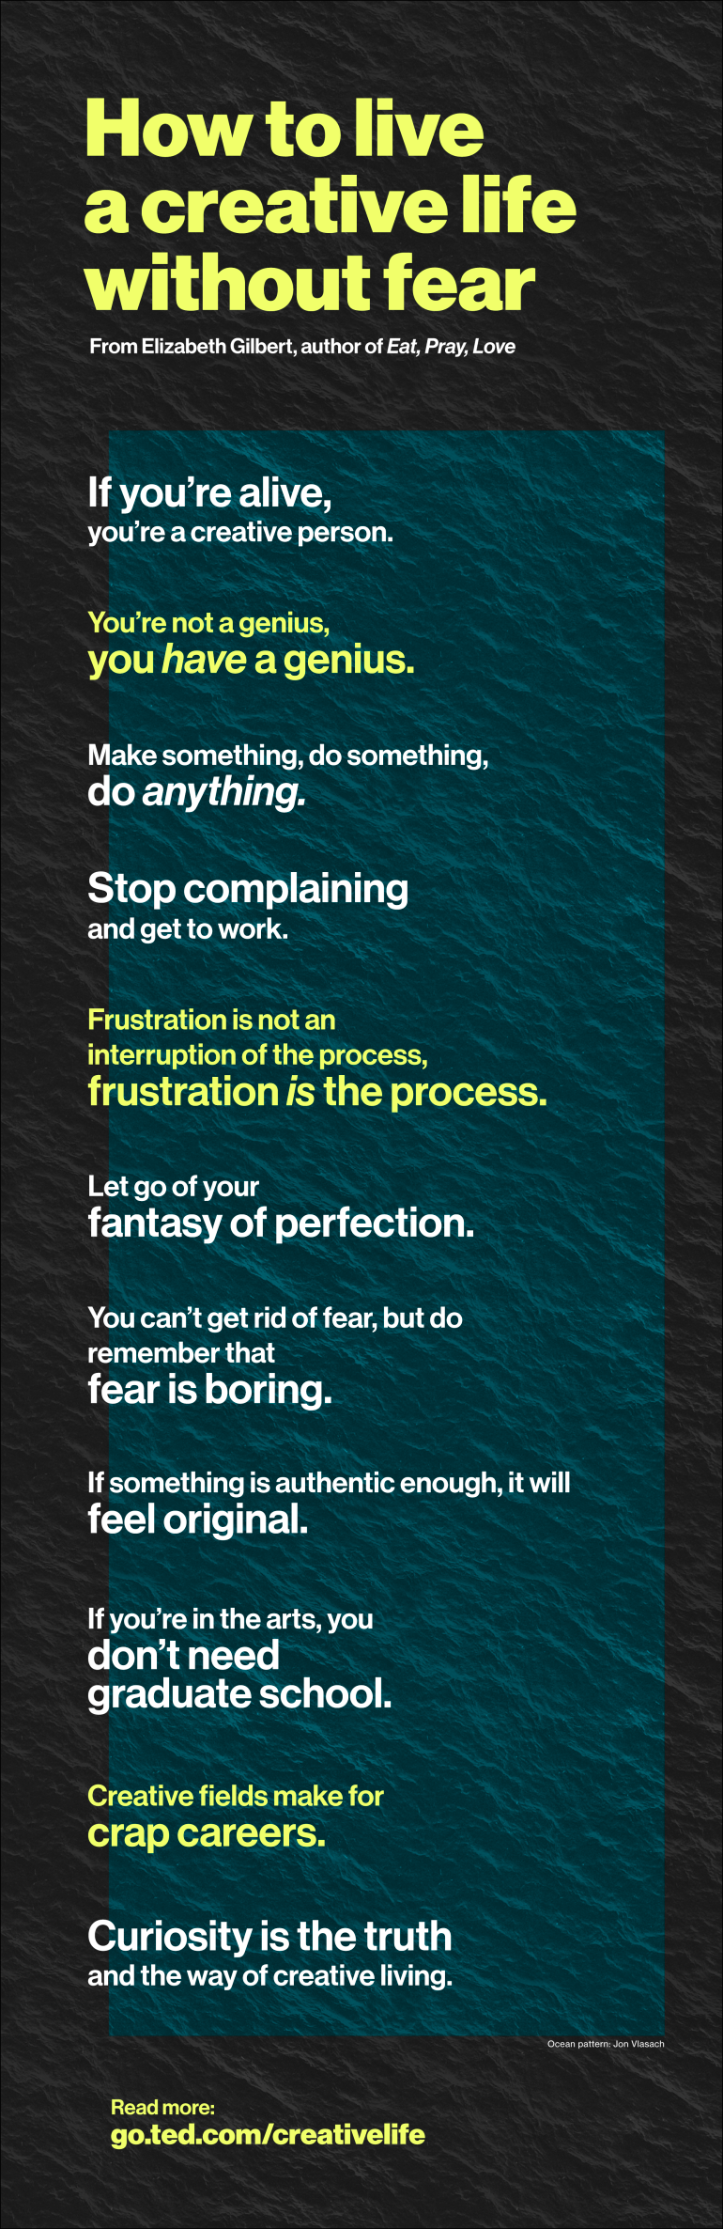 creativity_without_fear_ideas-ted-com_r